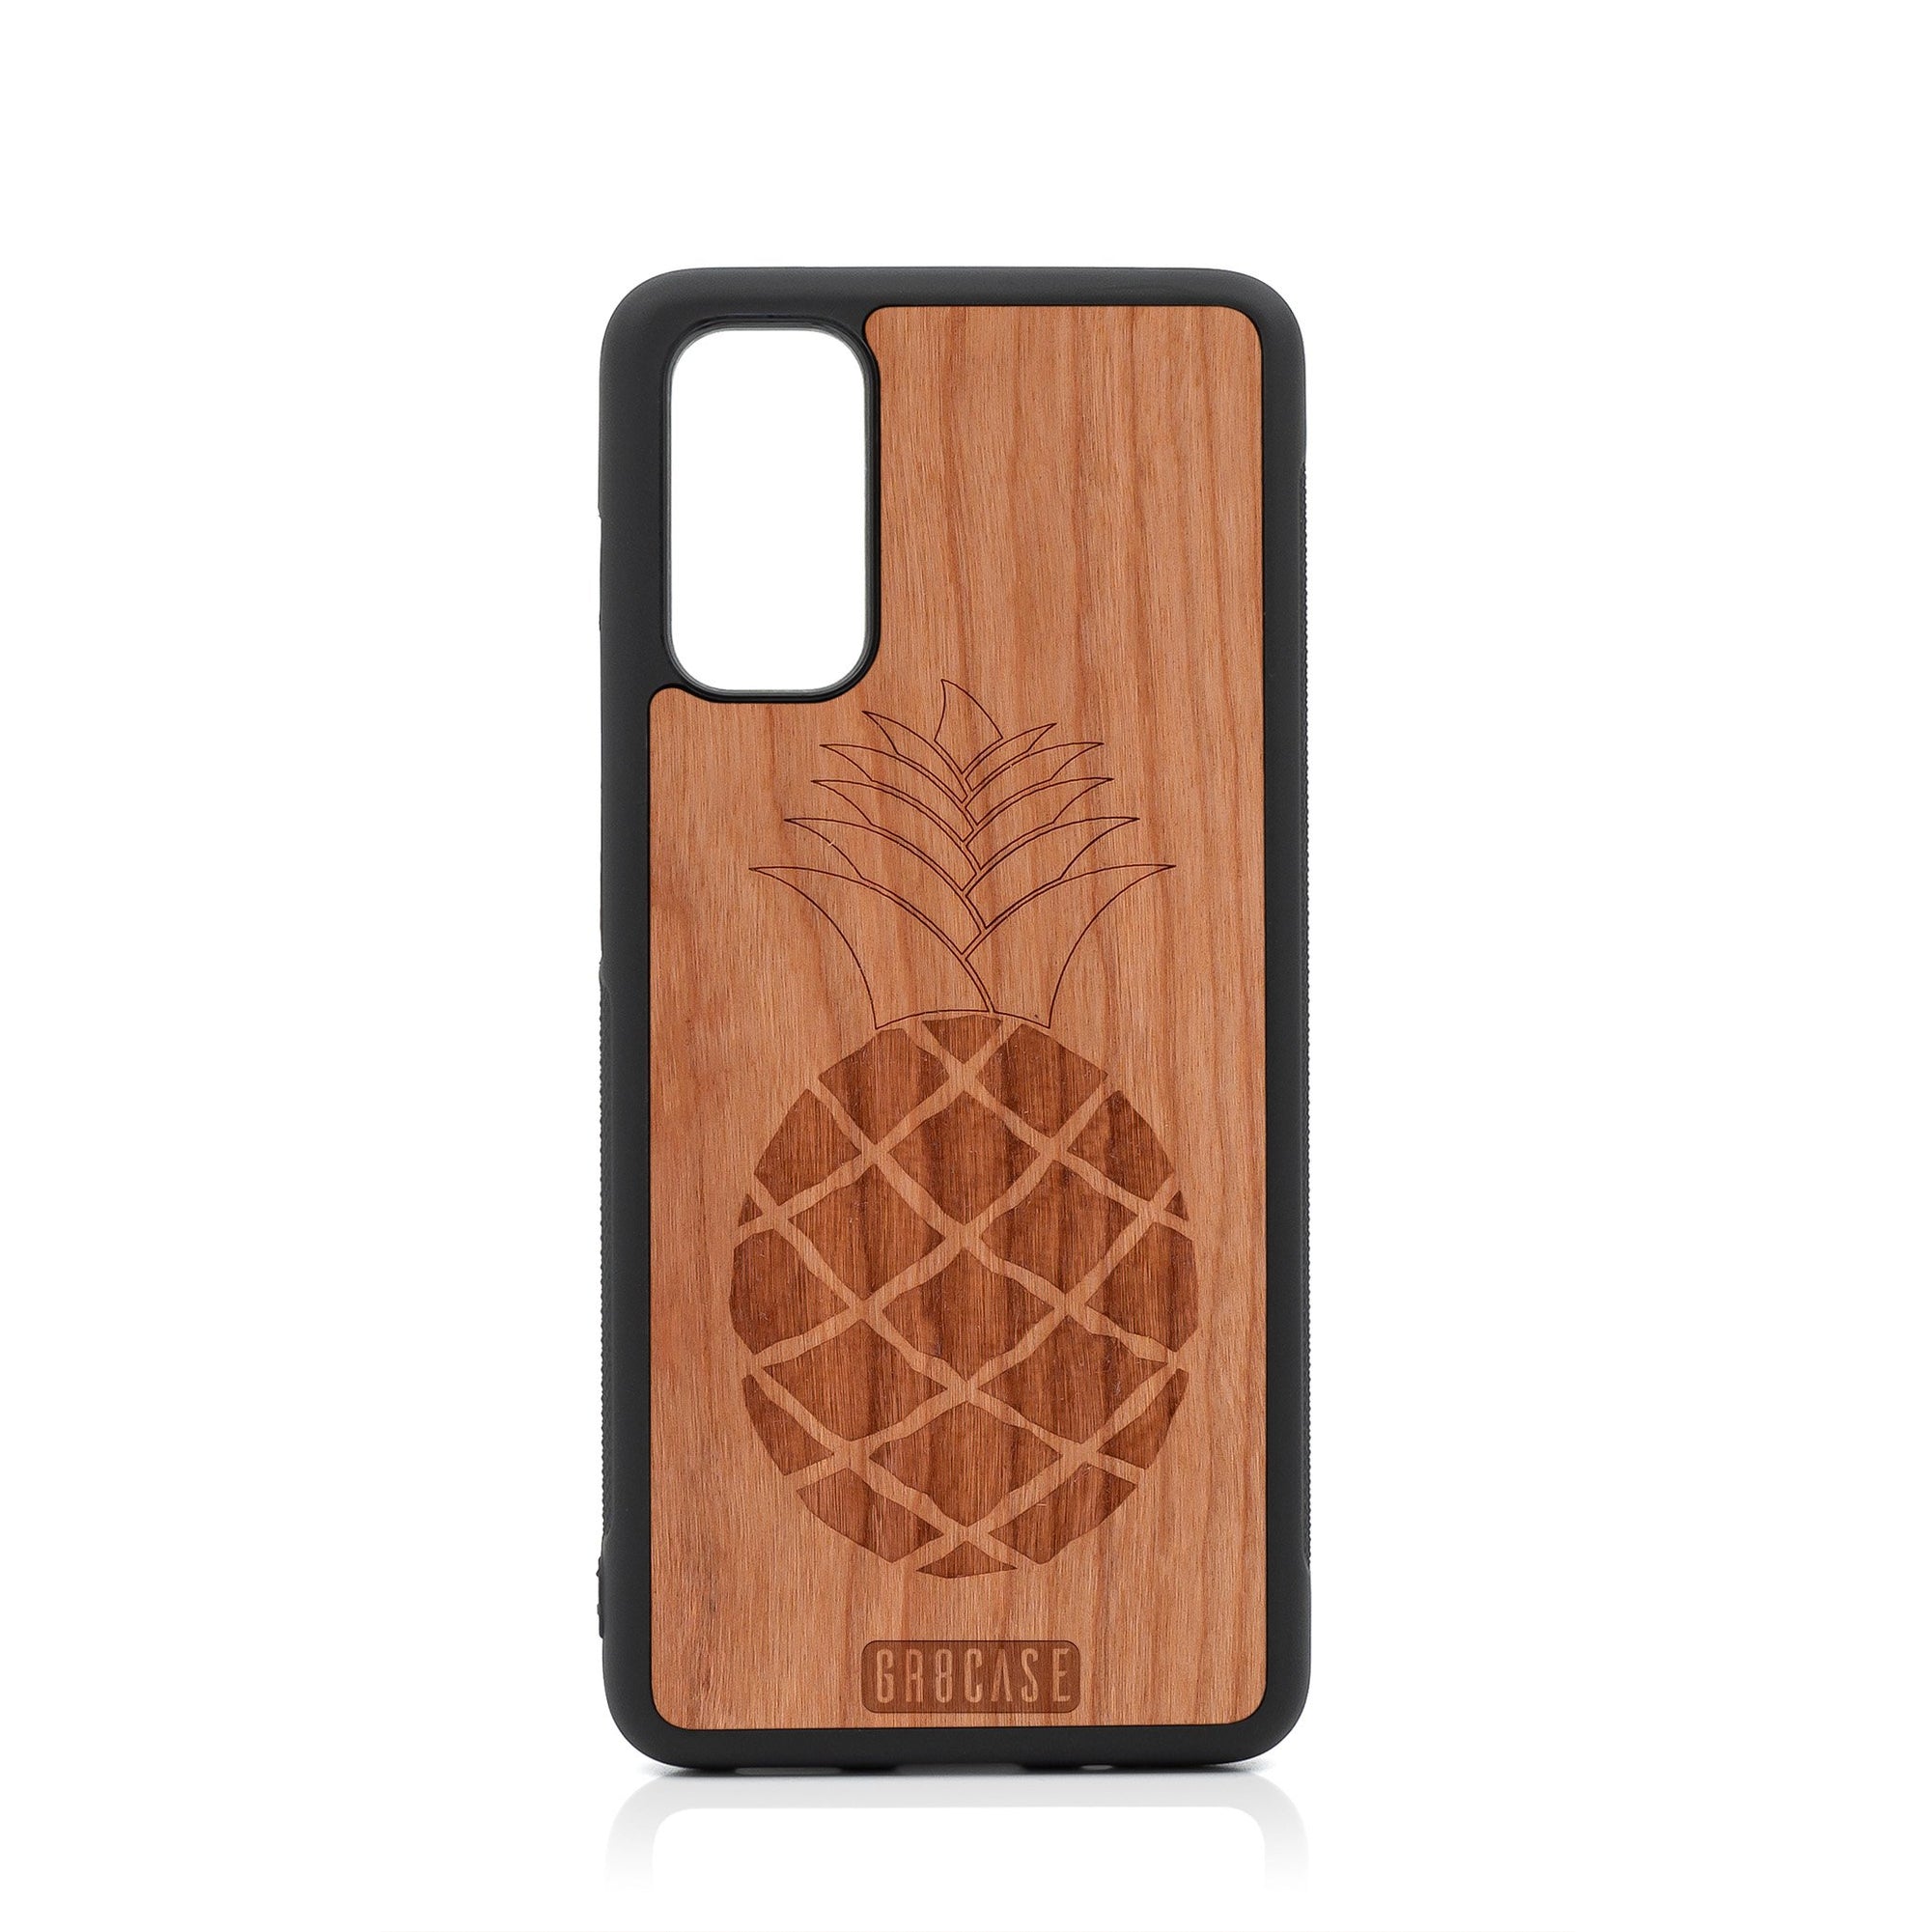 Pineapple Design Wood Case For Samsung Galaxy S20 FE 5G by GR8CASE